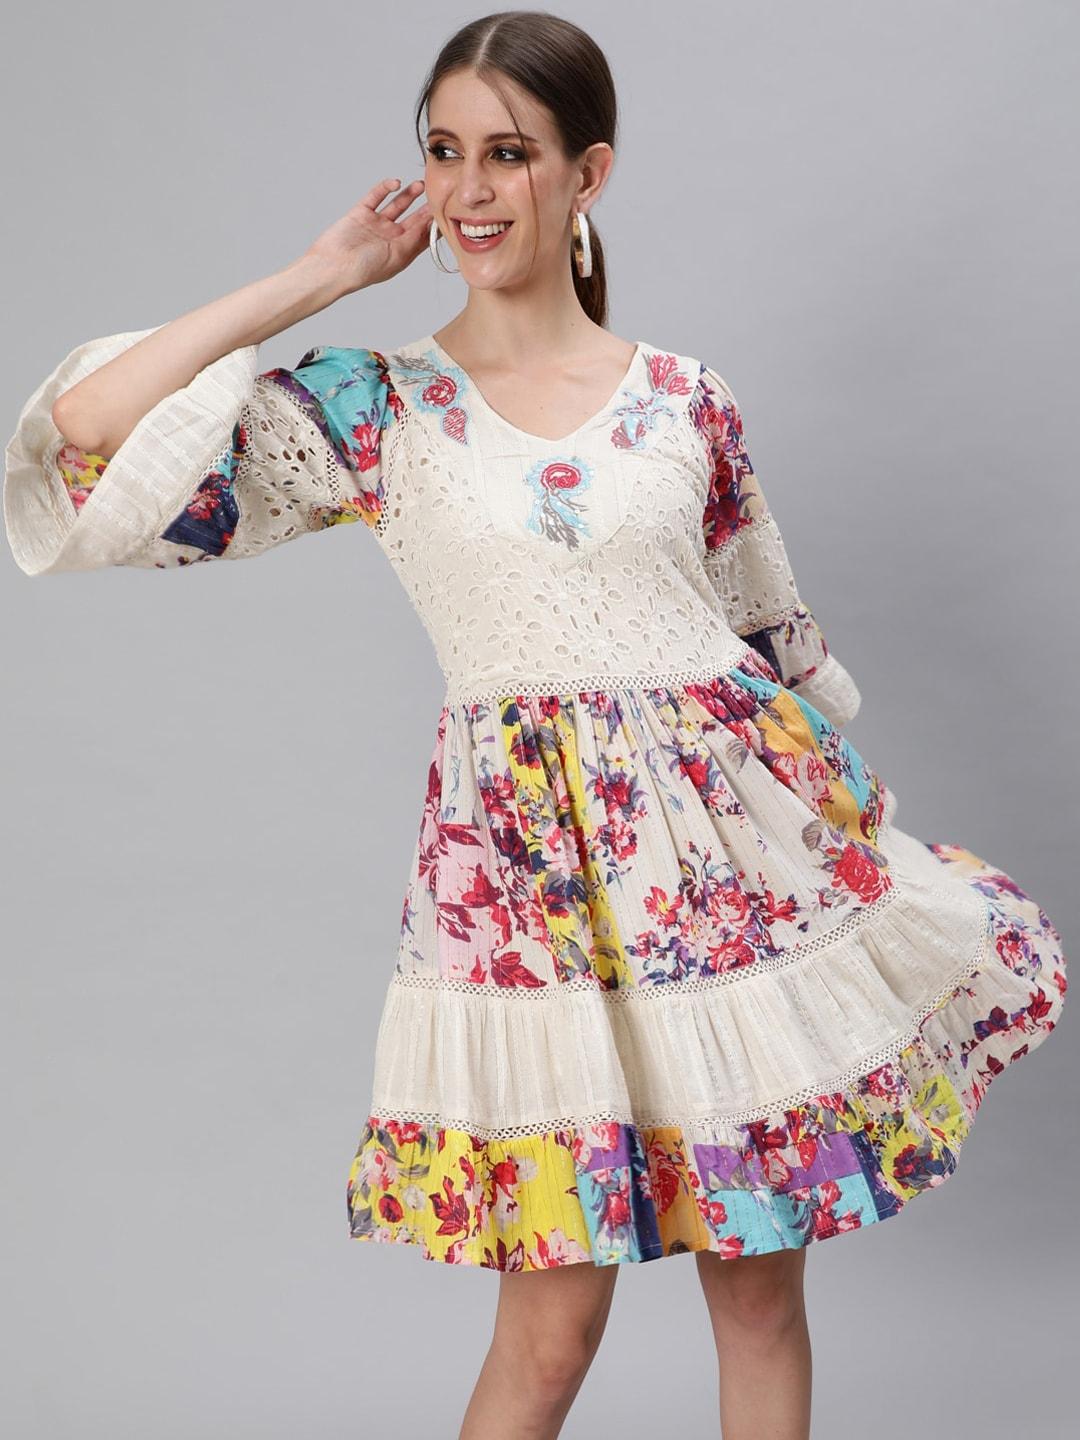 ishin-women-off-white-&-yellow-floral-tiered-dress